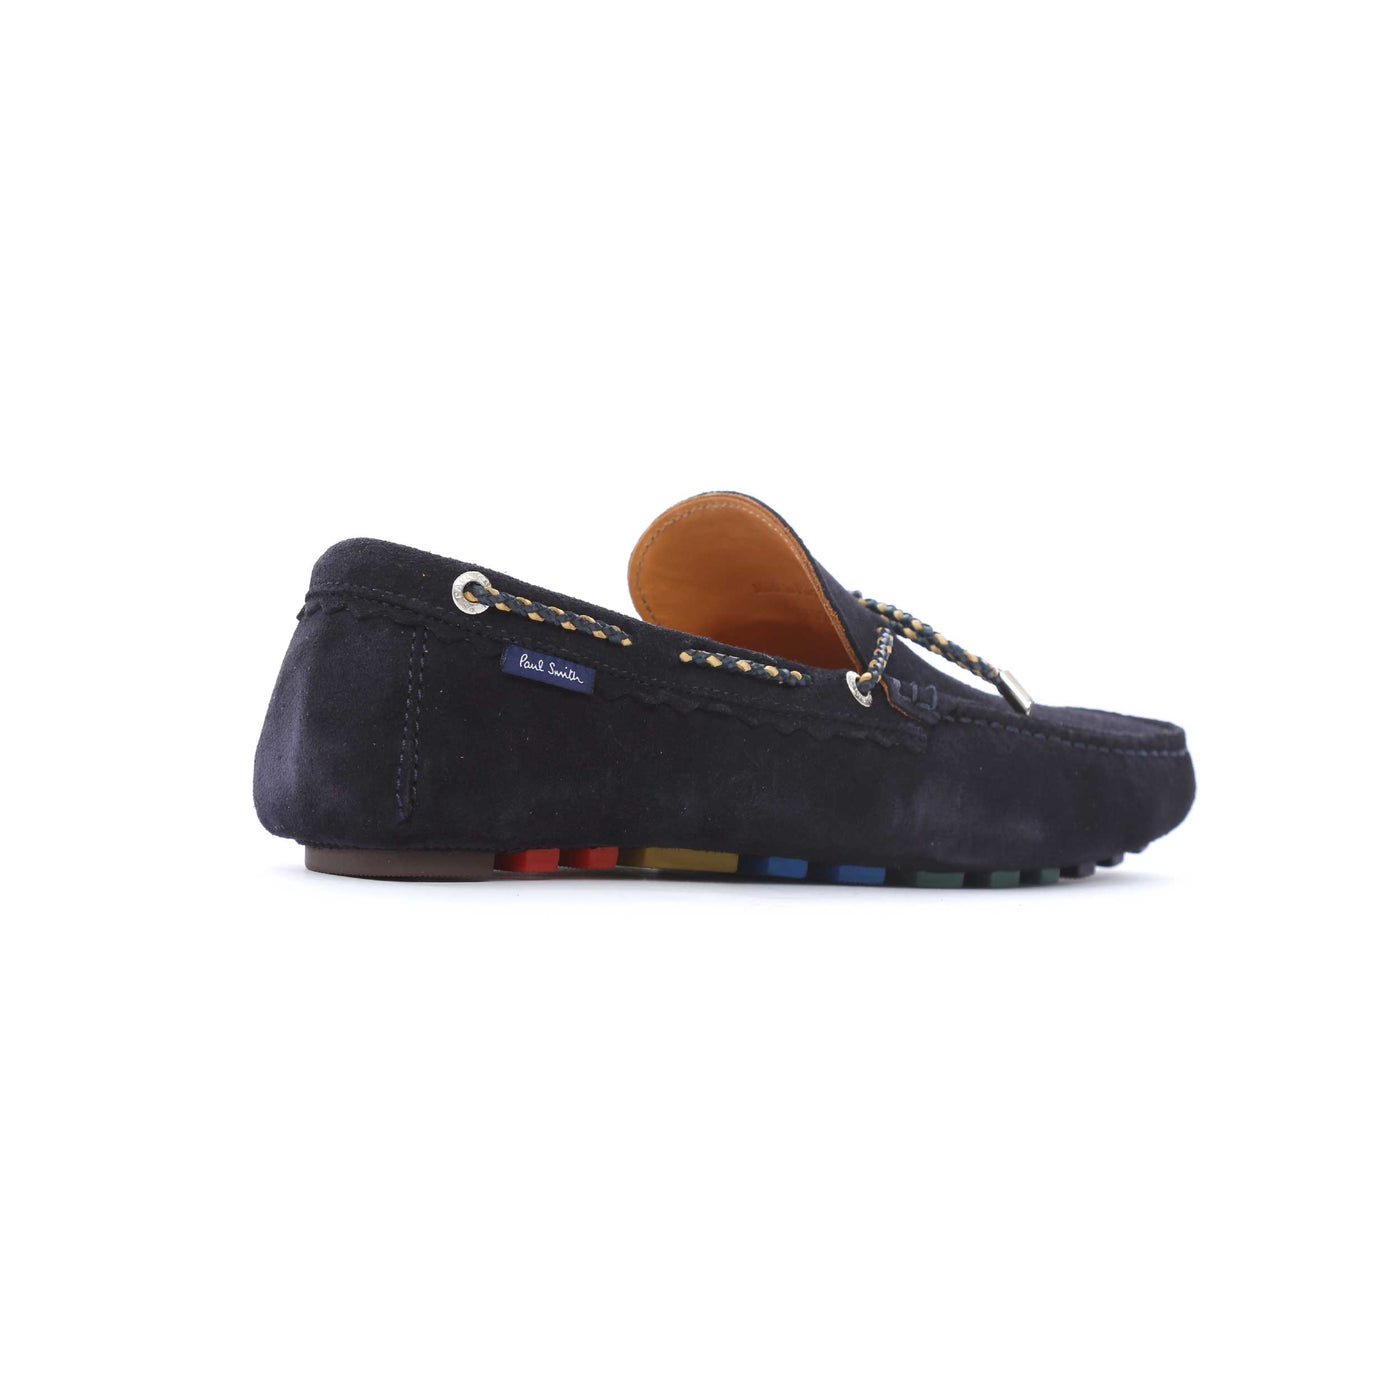 Paul Smith Springfield Loafer in Navy